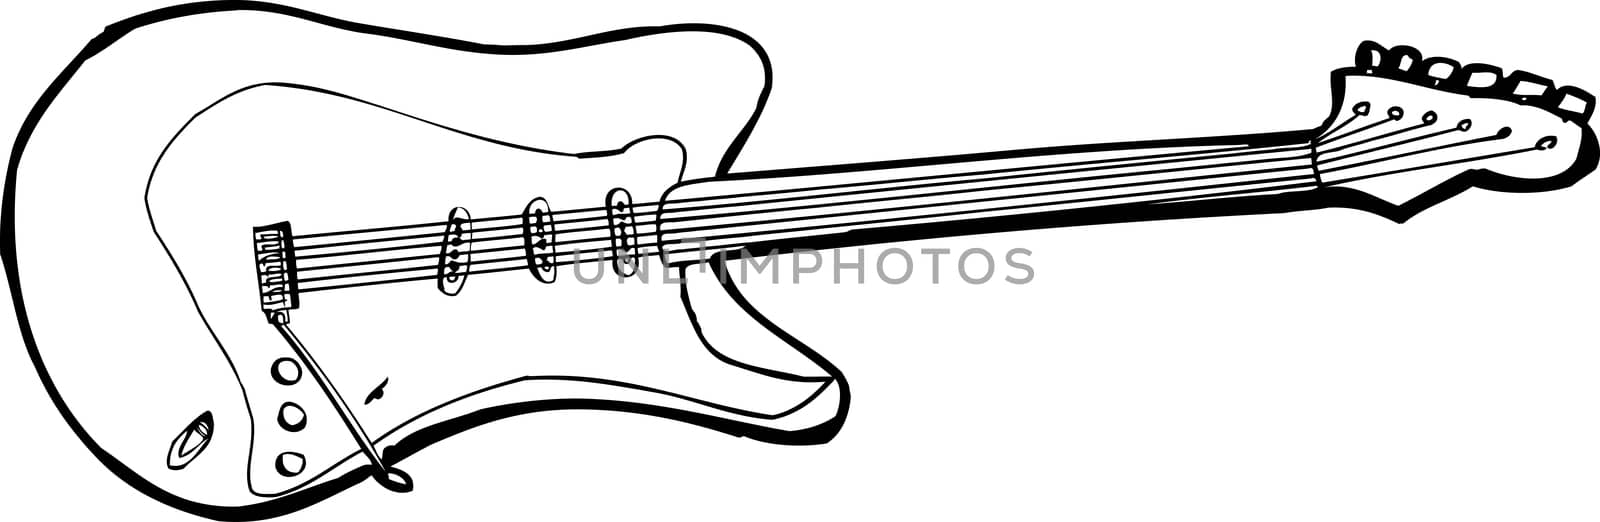 Isolated illustration of an outlined electric guitar over white